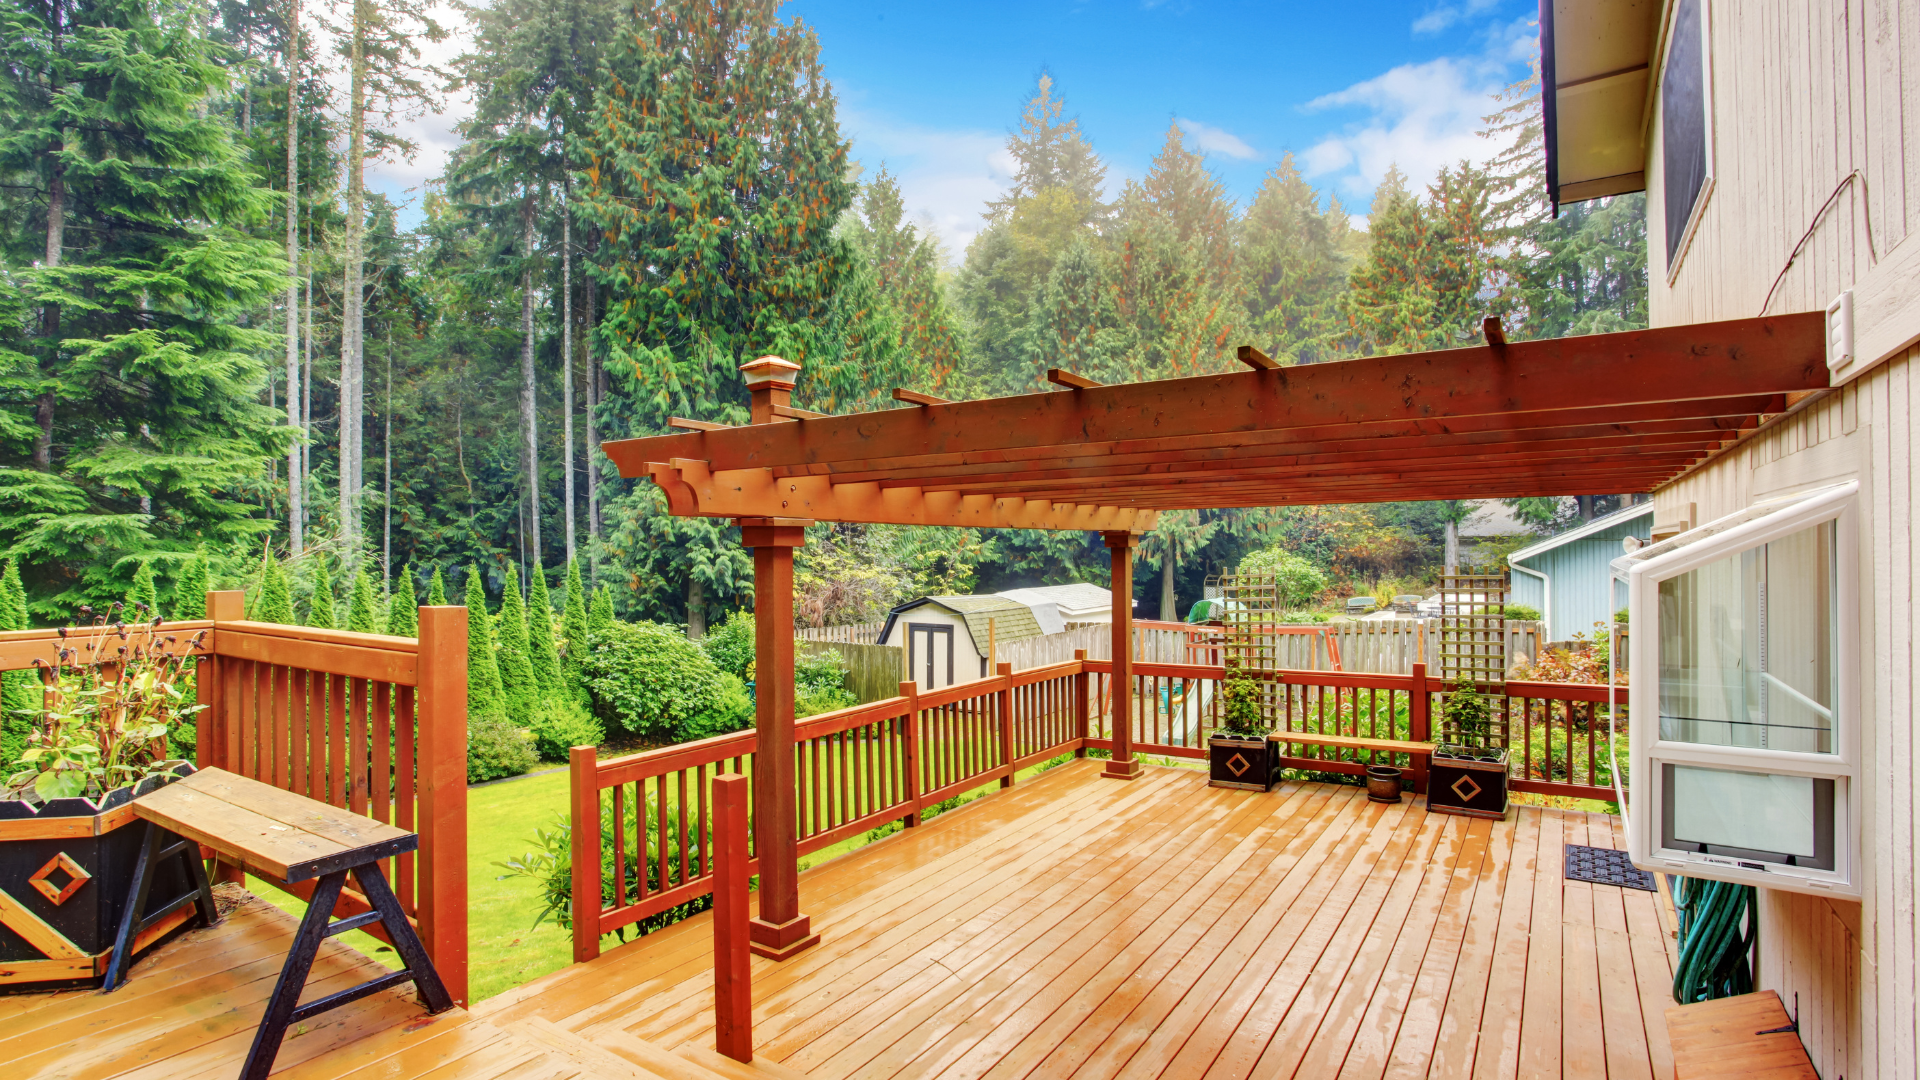 A beautiful photo of a deck on the back of a house. The deck is surrounded by trees and greenery